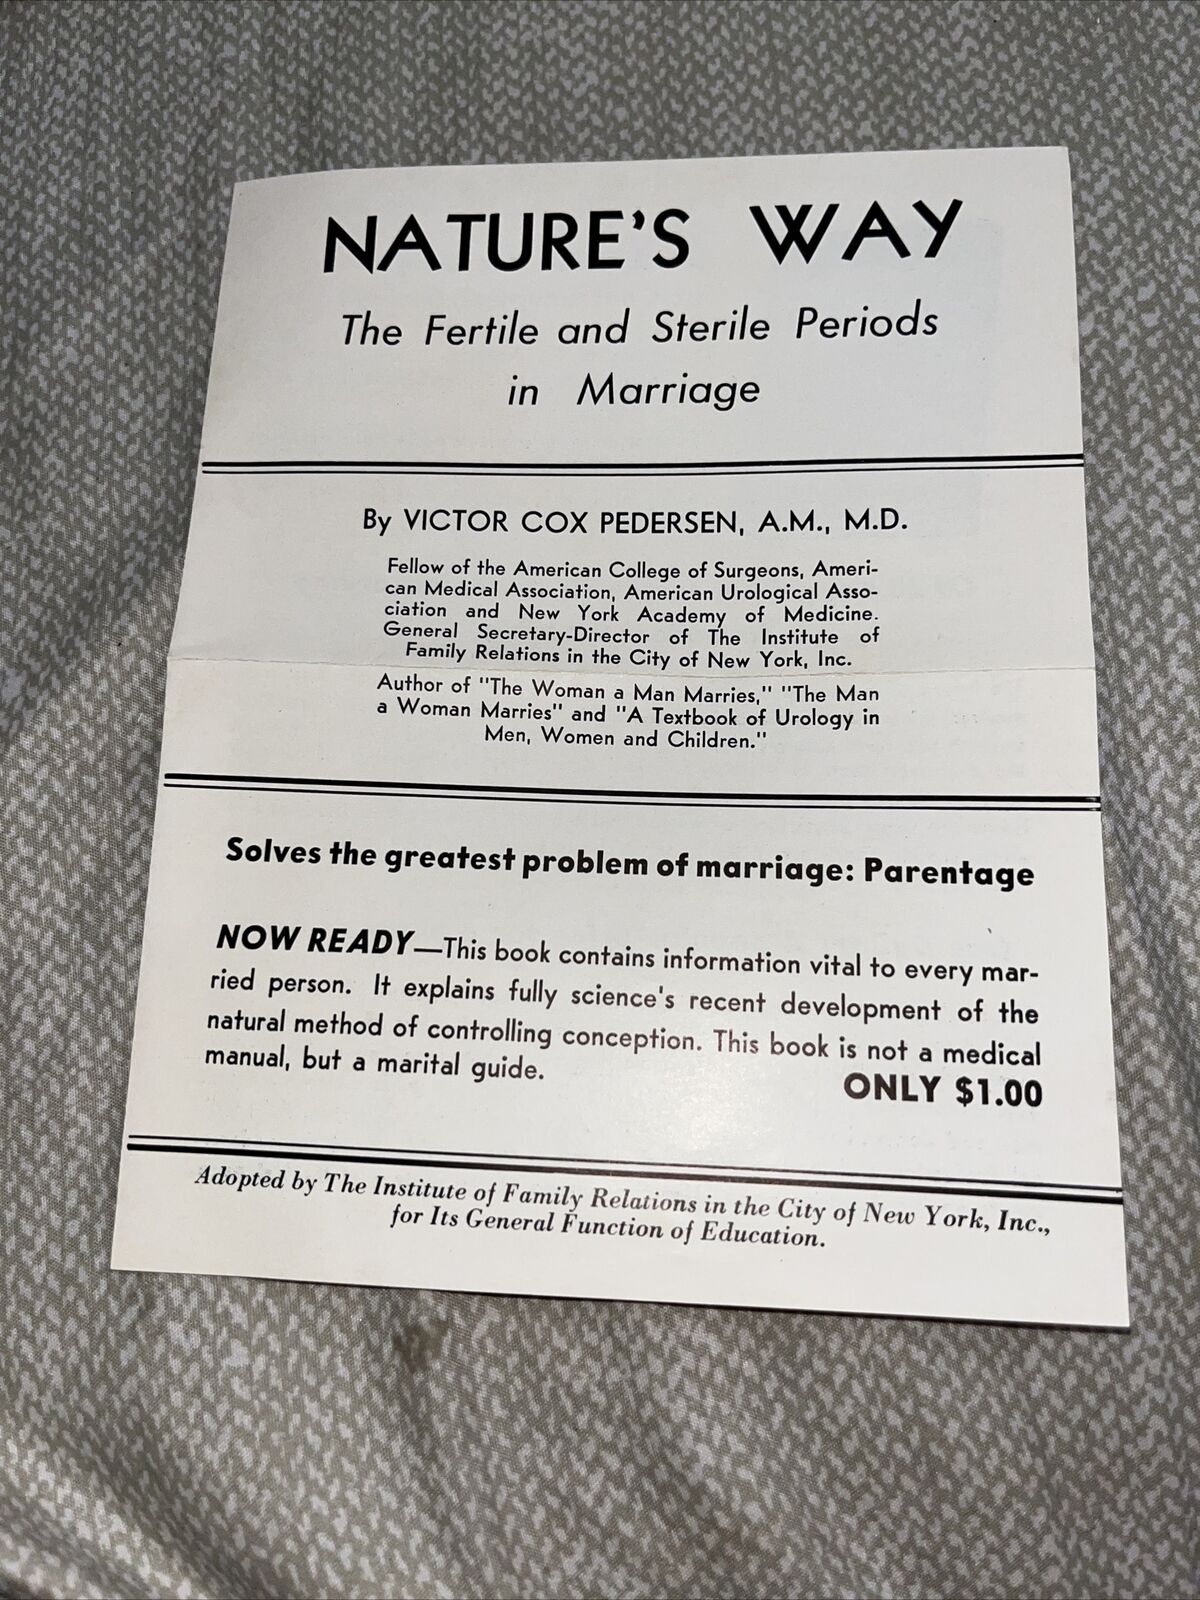 Vintage Advertisement for Nature’s Way: Fertile and Sterile Periods in Marraige